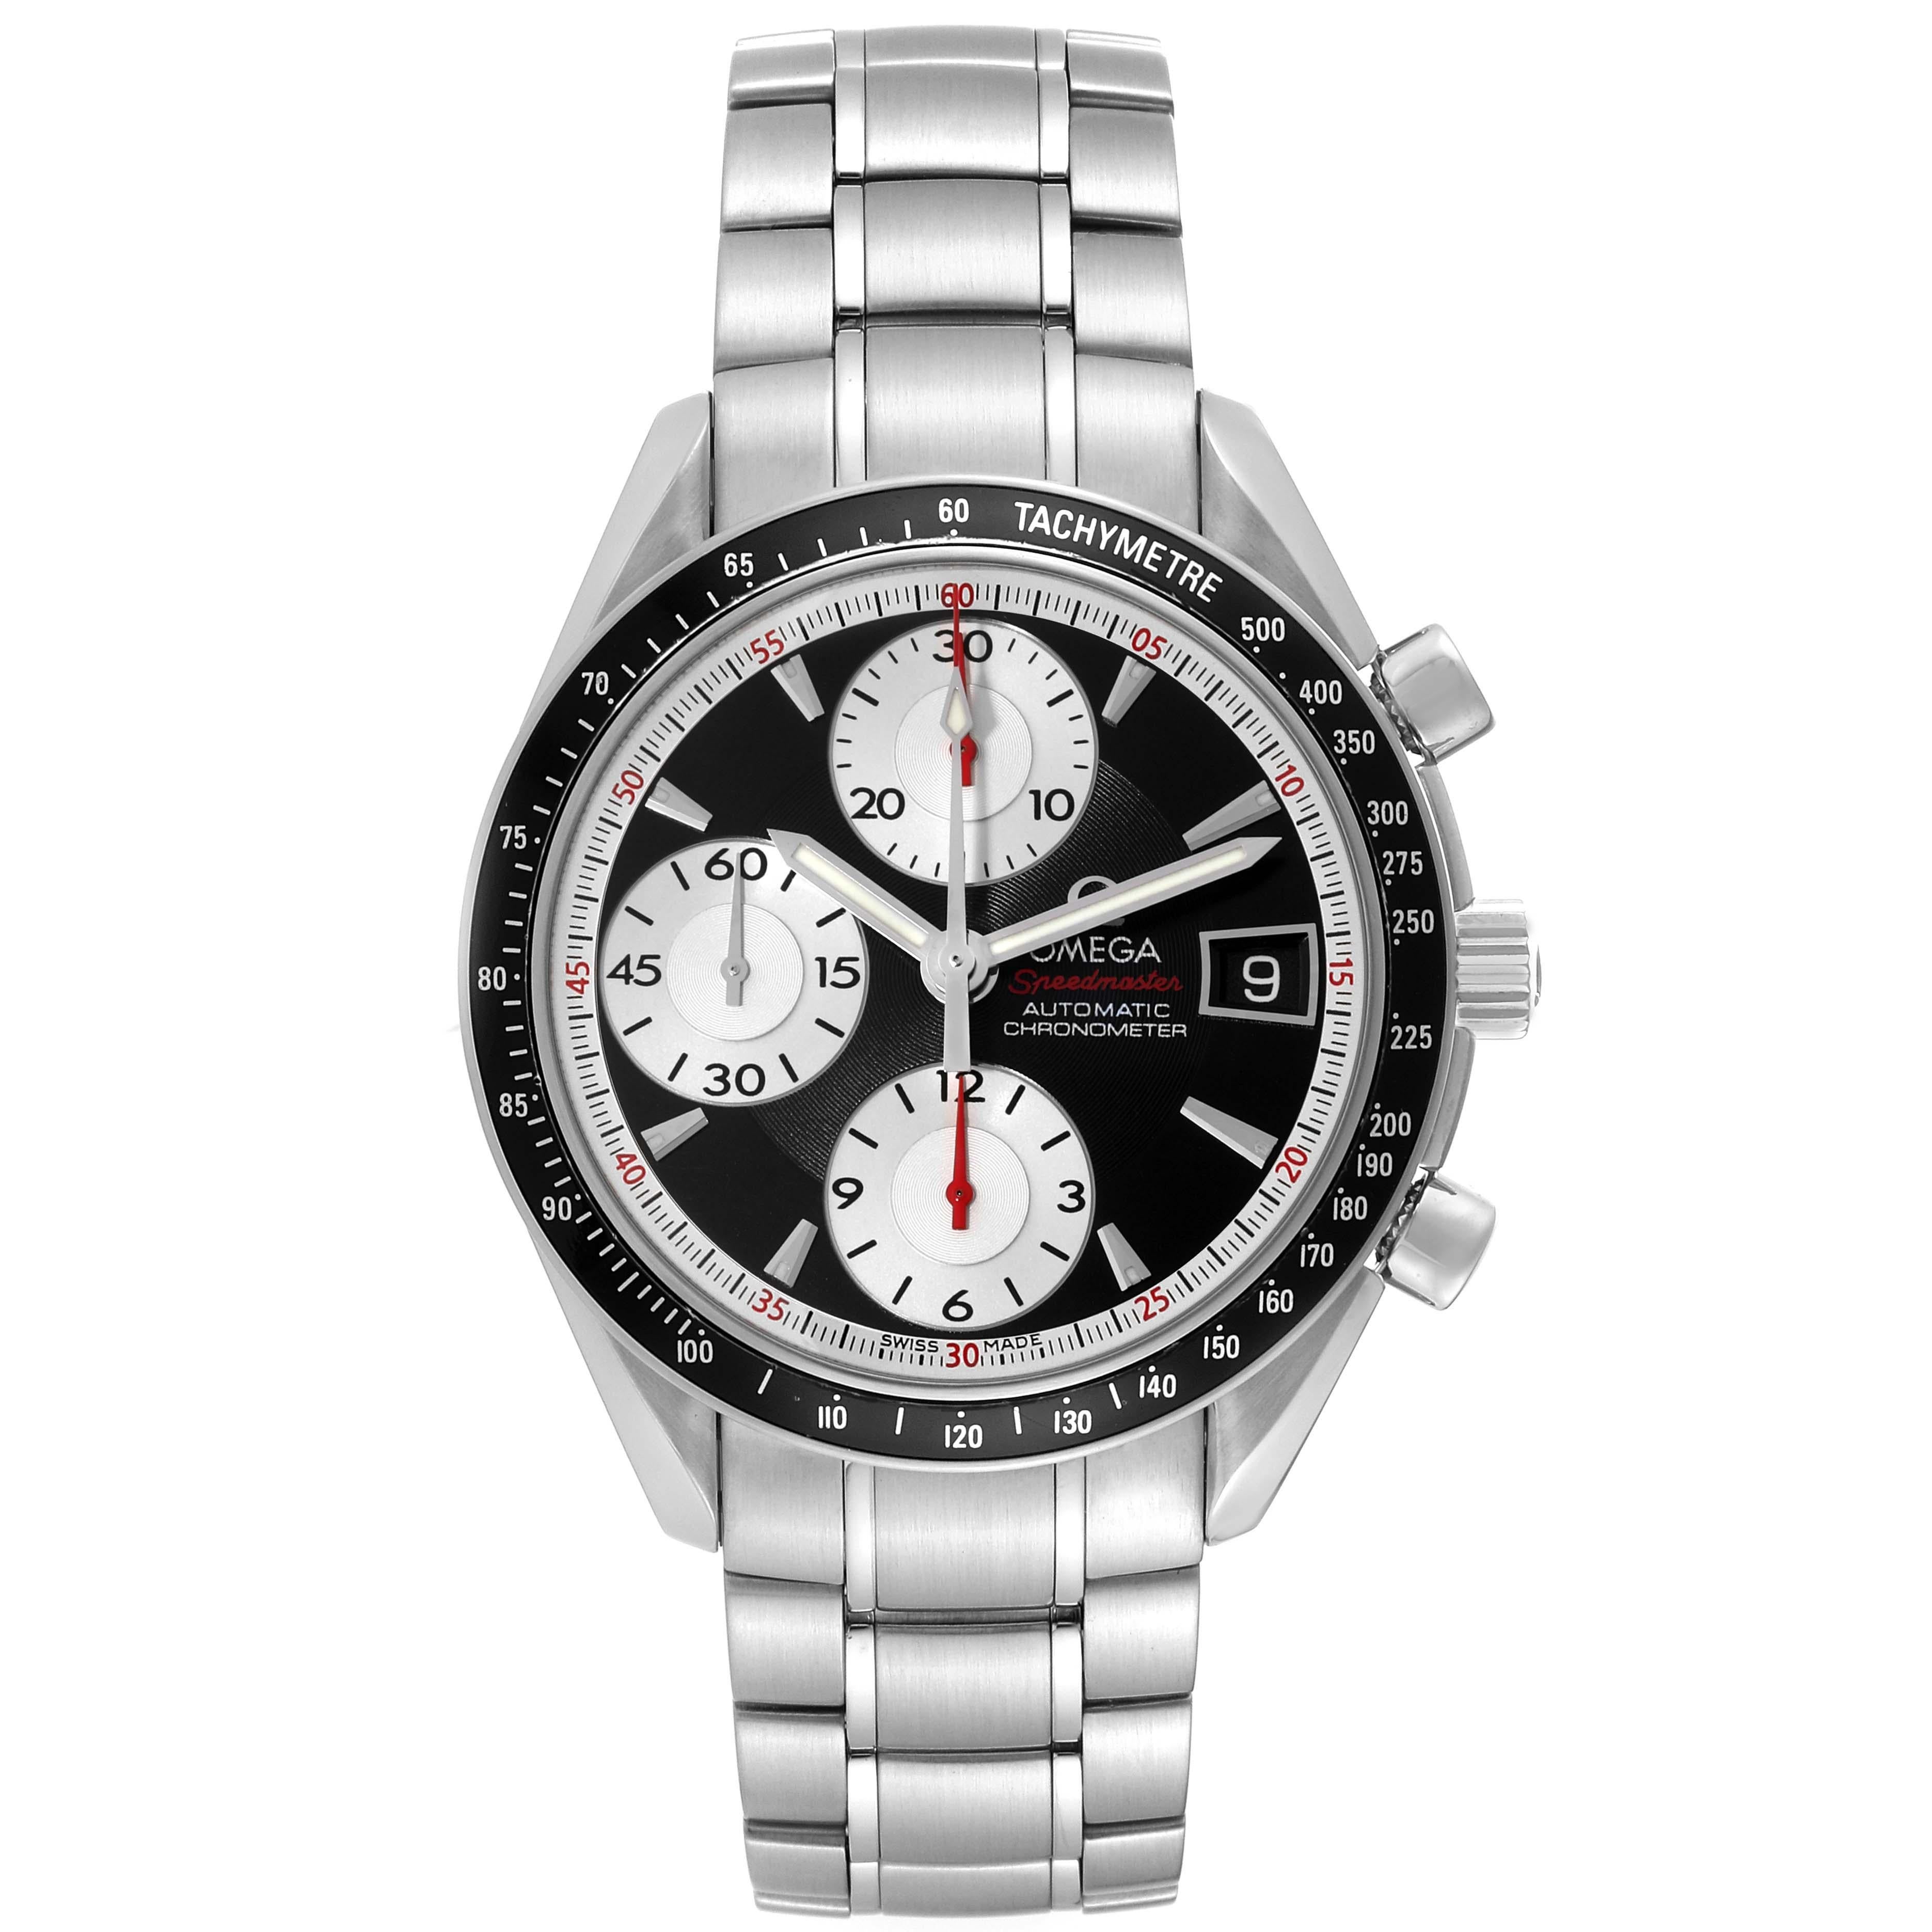 Omega Speedmaster Date 40 Black Dial Steel Mens Watch 3210.51.00. Automatic self-winding chronograph movement. Stainless steel round case 40.0 mm in diameter. Black bezel with tachymetric scale. Scratch-resistant sapphire crystal with